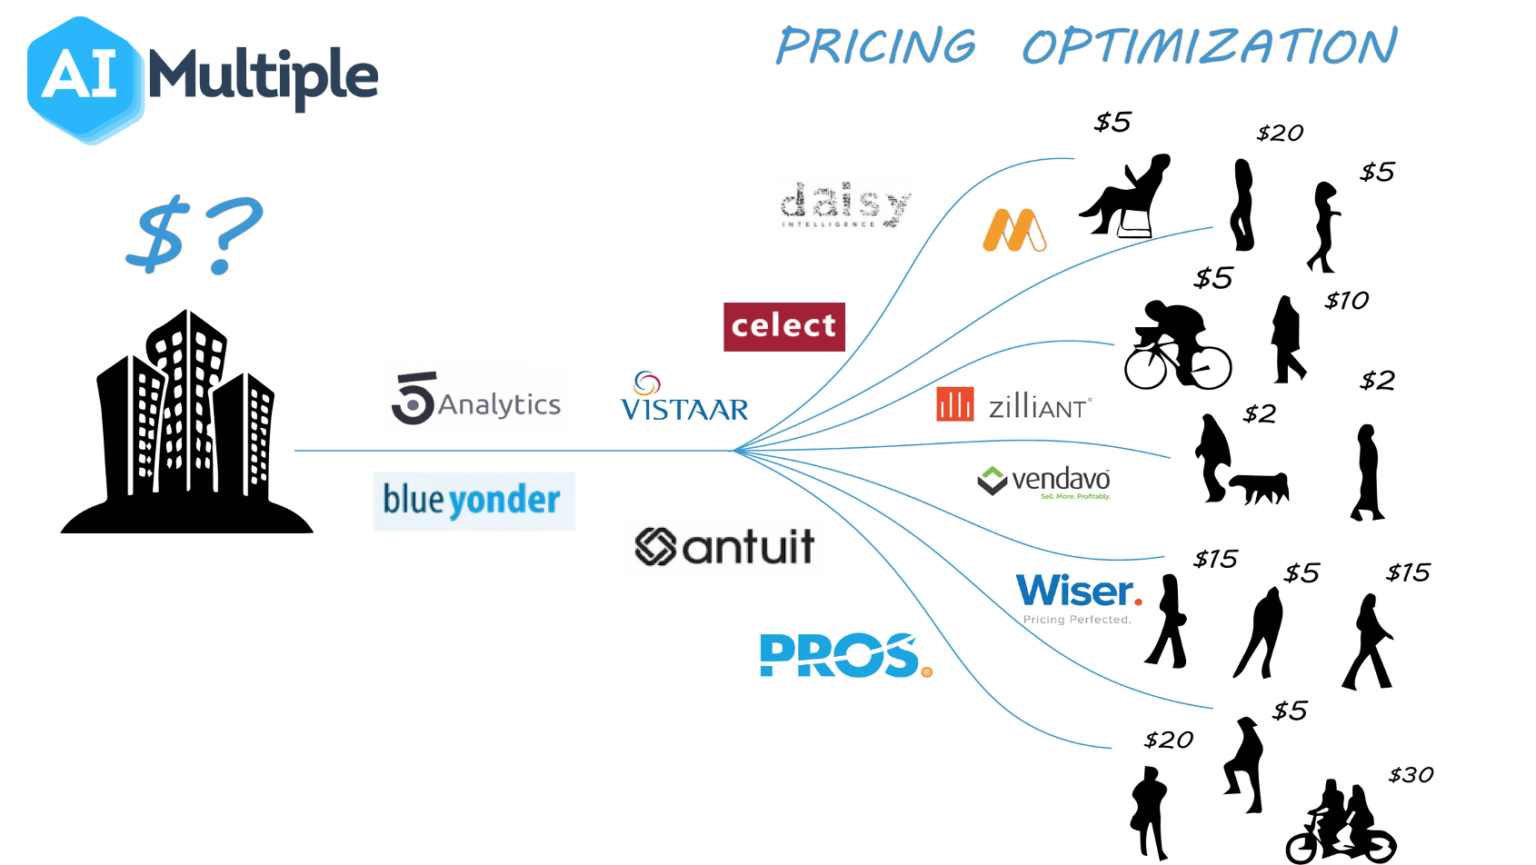 dynamic pricing pros and cons